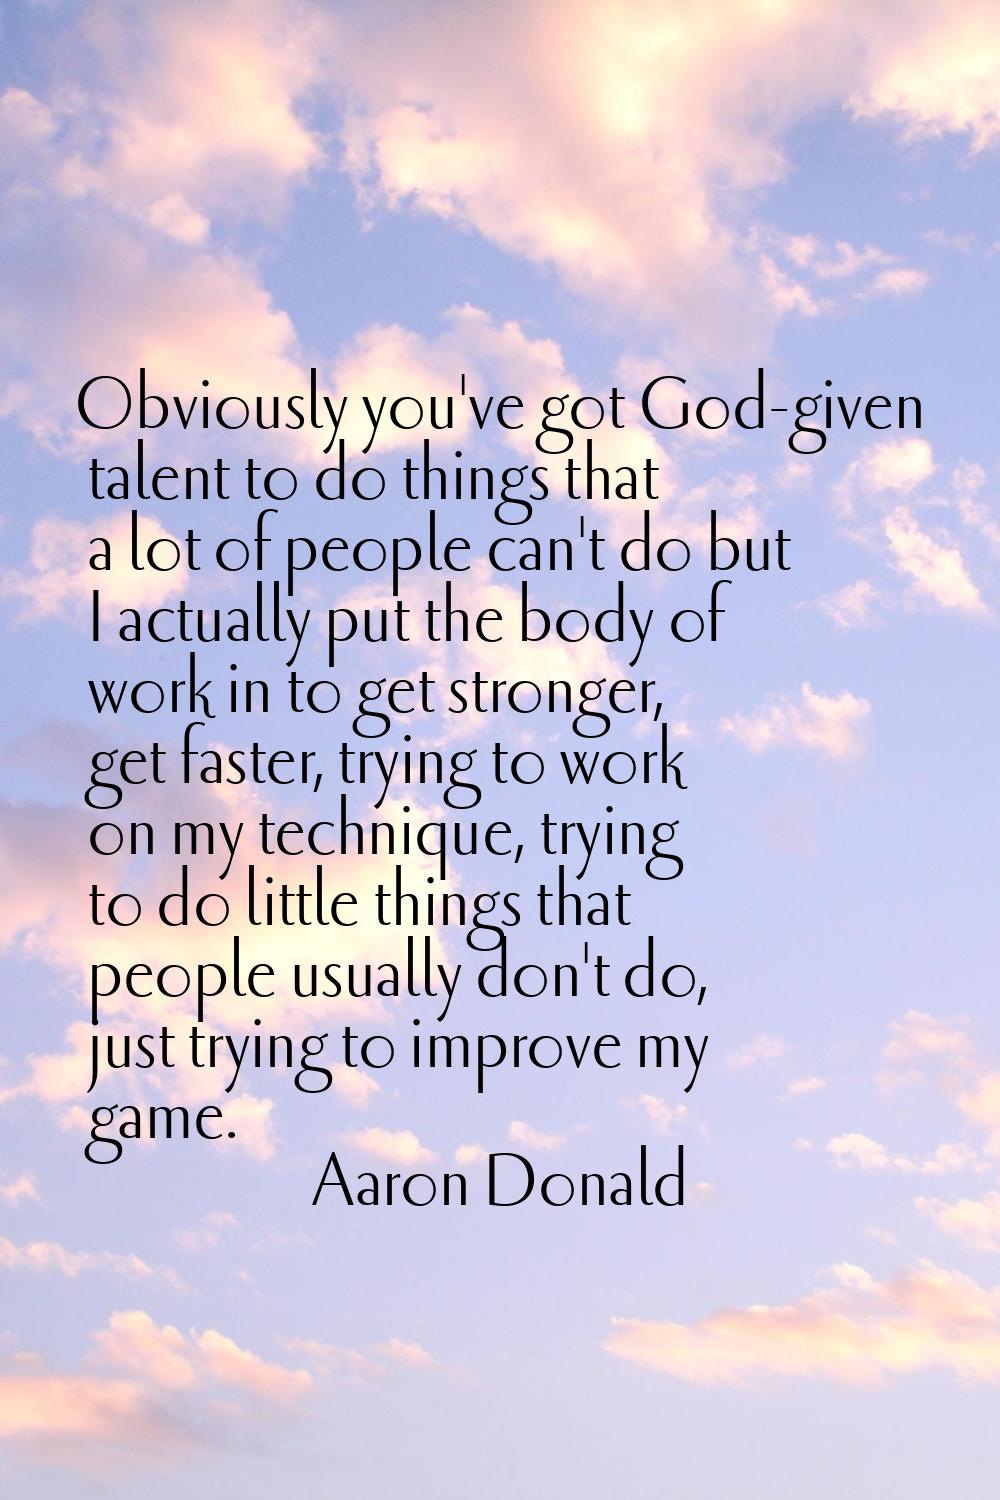 Obviously you've got God-given talent to do things that a lot of people can't do but I actually put